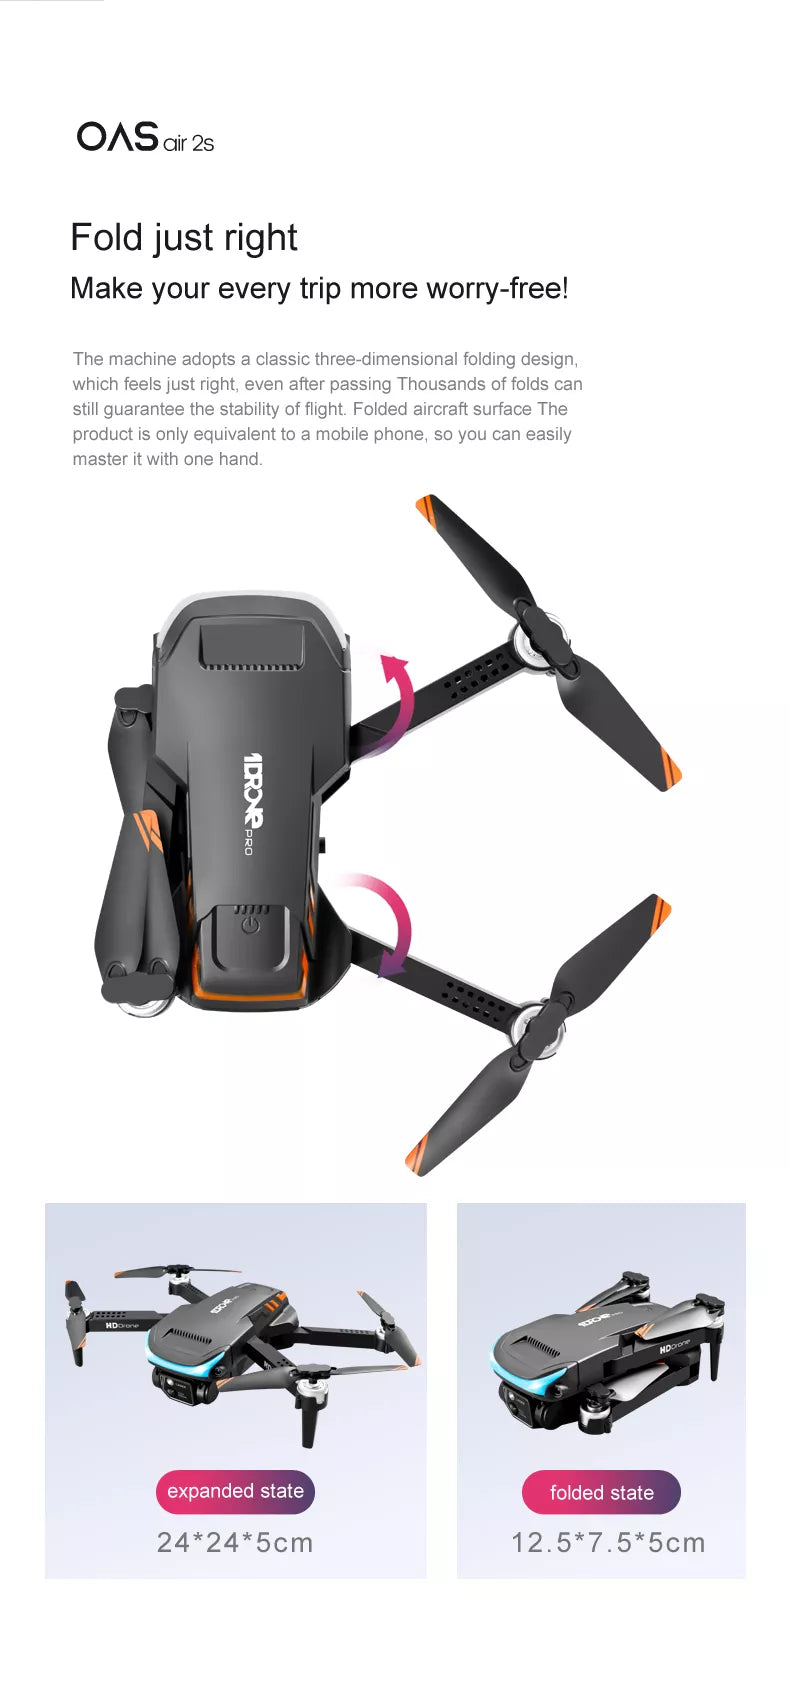 Z888 Drone, oasair 2s fold just right make your every trip more